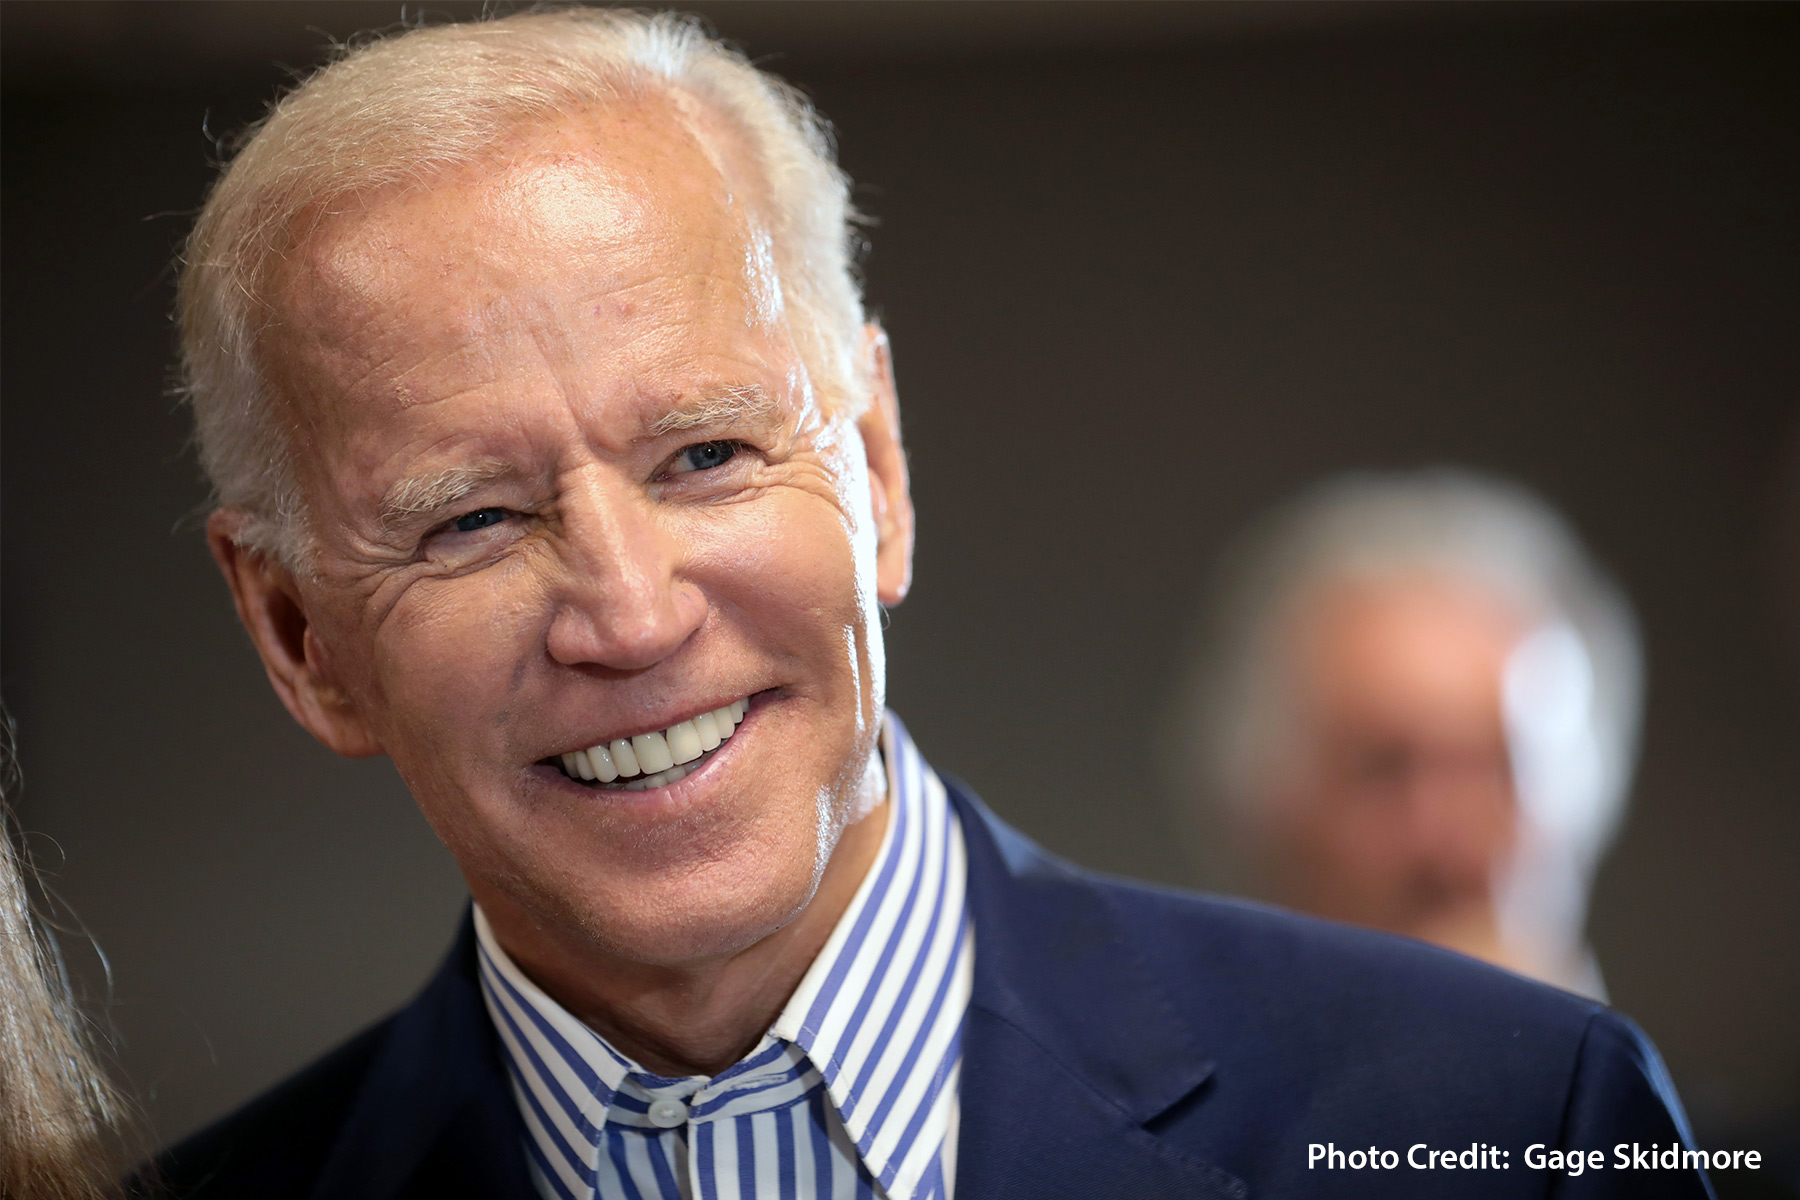 Biden Vows Healing and Action on COVID Pandemic